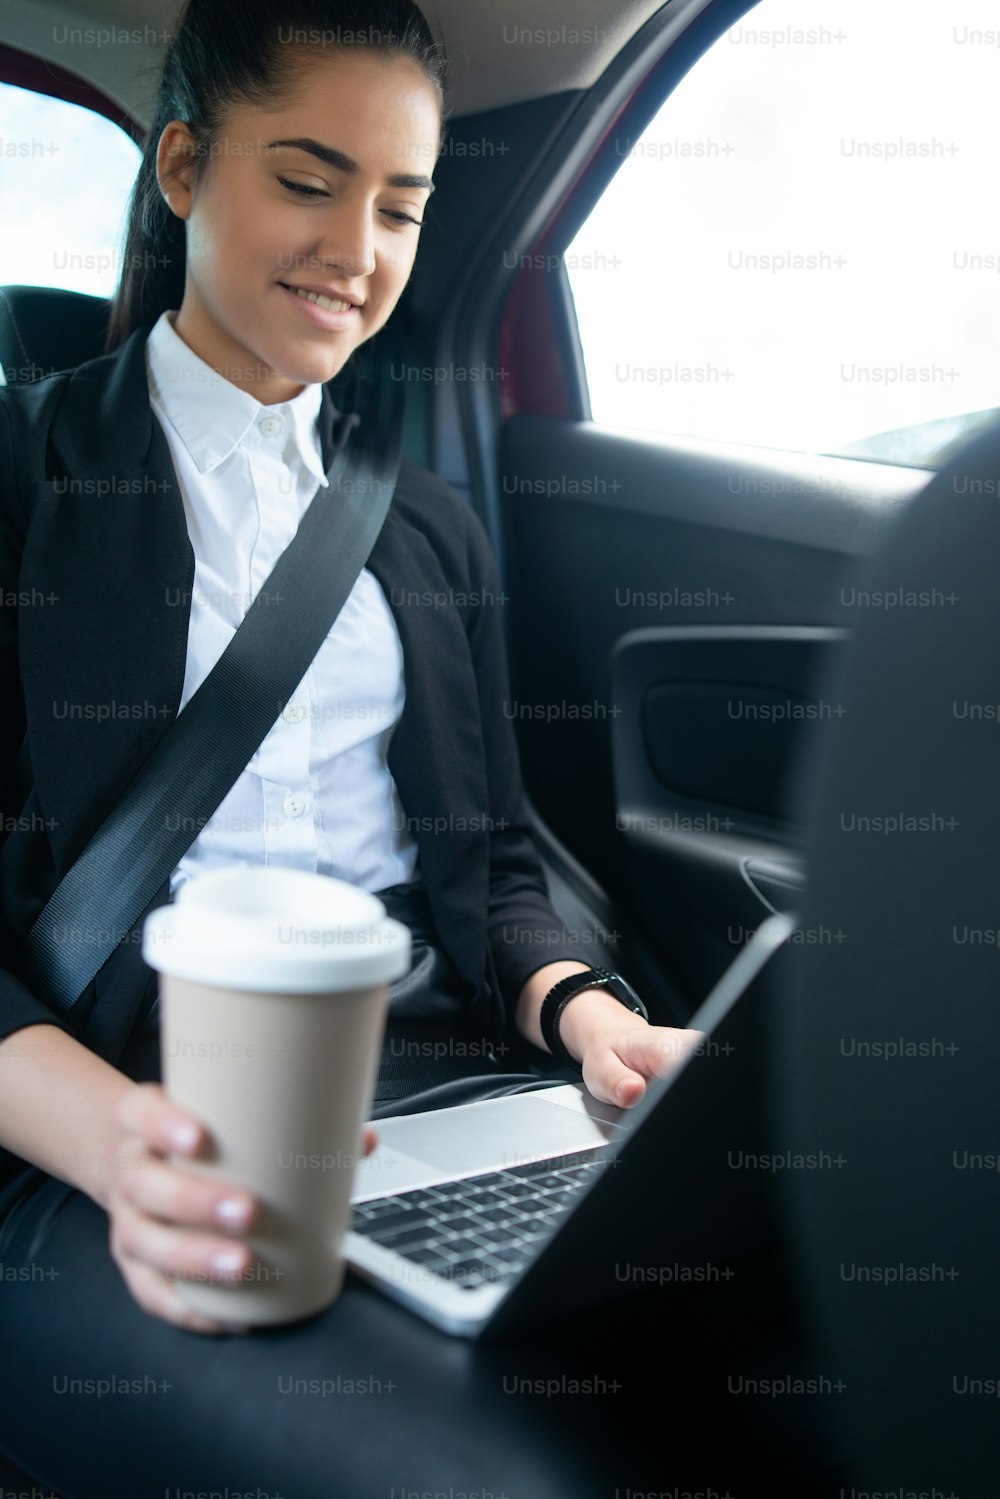 Portrait of business woman using her laptop on way to work in a car. Business concept.